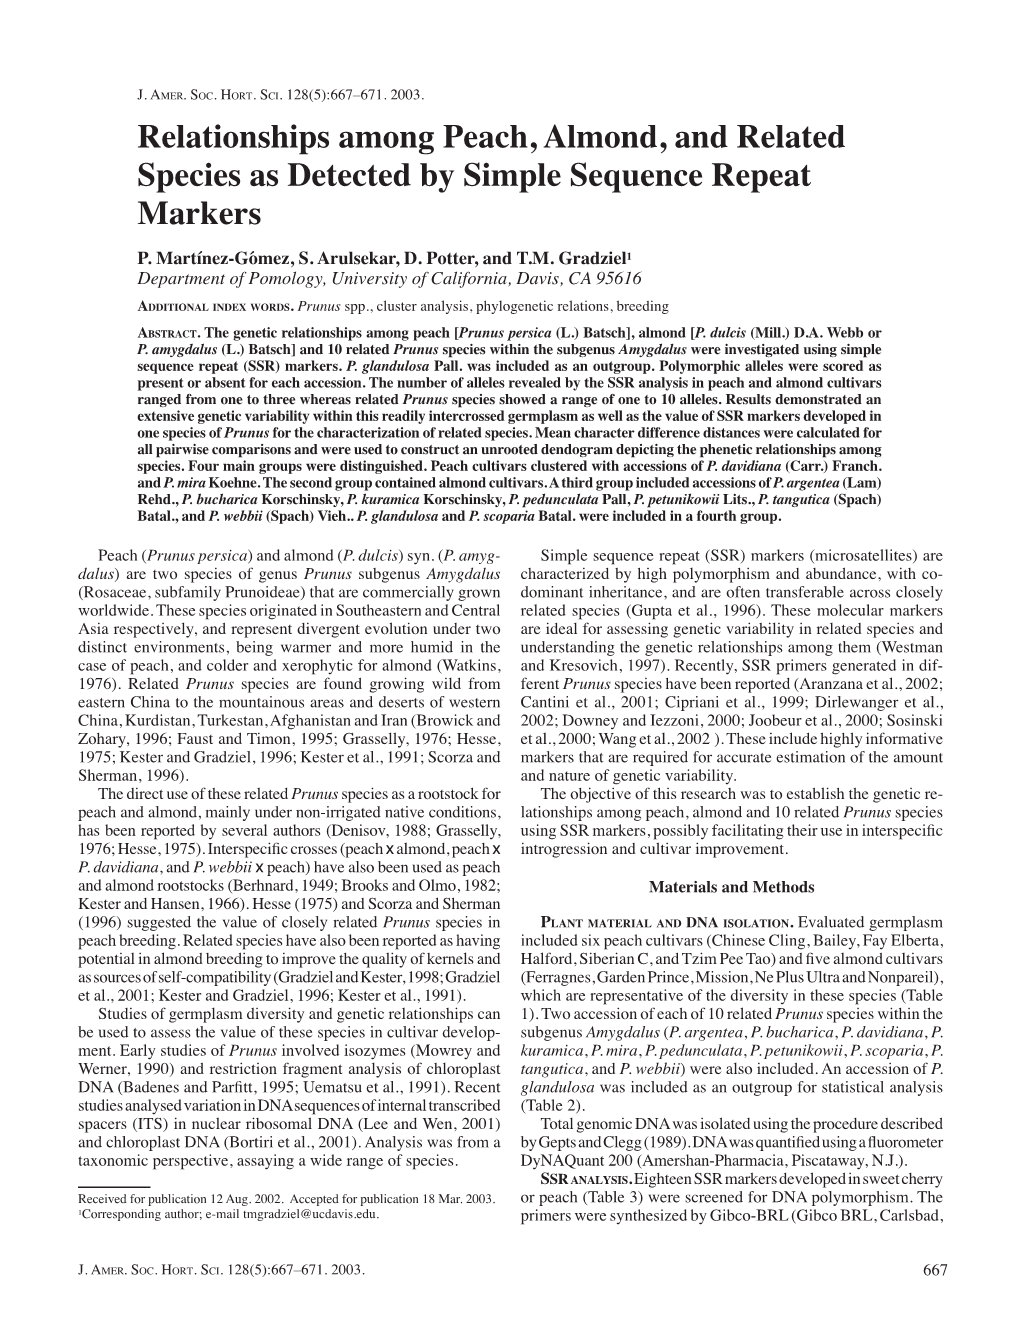 Relationships Among Peach, Almond, and Related Species As Detected by Simple Sequence Repeat Markers